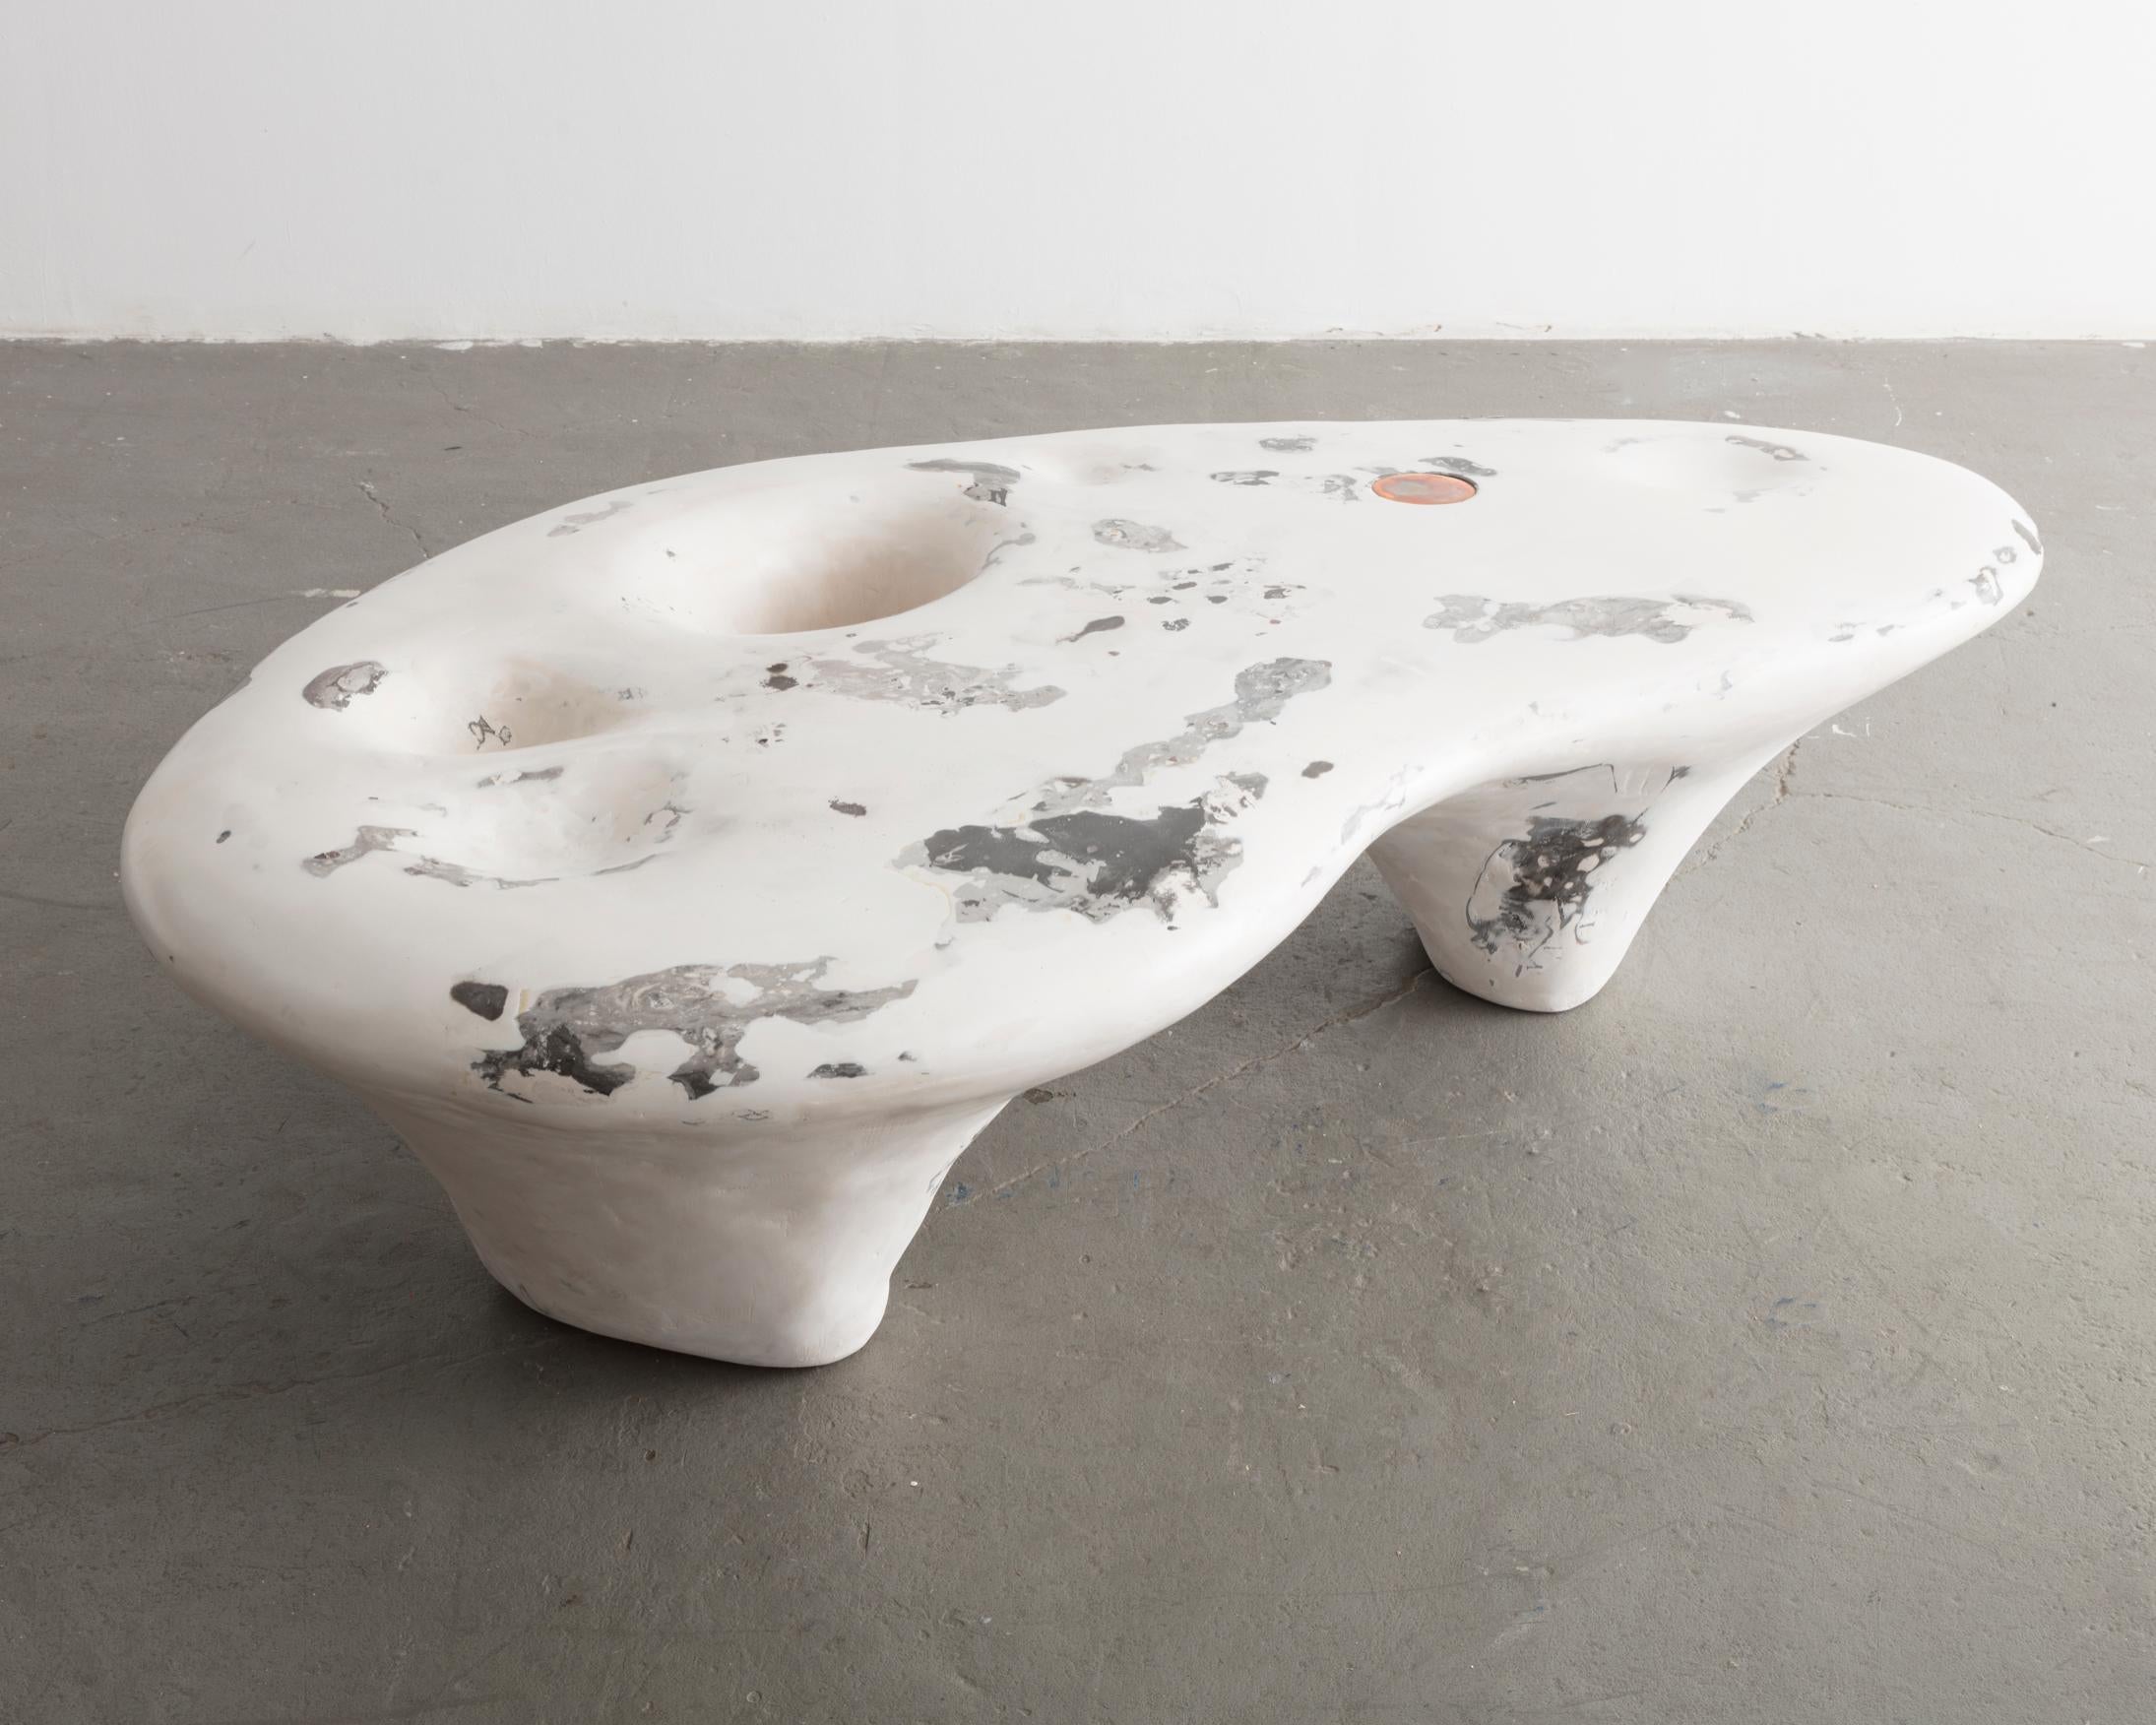 Unique sculptural polar bear or coffee table in black and white gypsum. Designed and made by Rogan Gregory, USA, 2018.